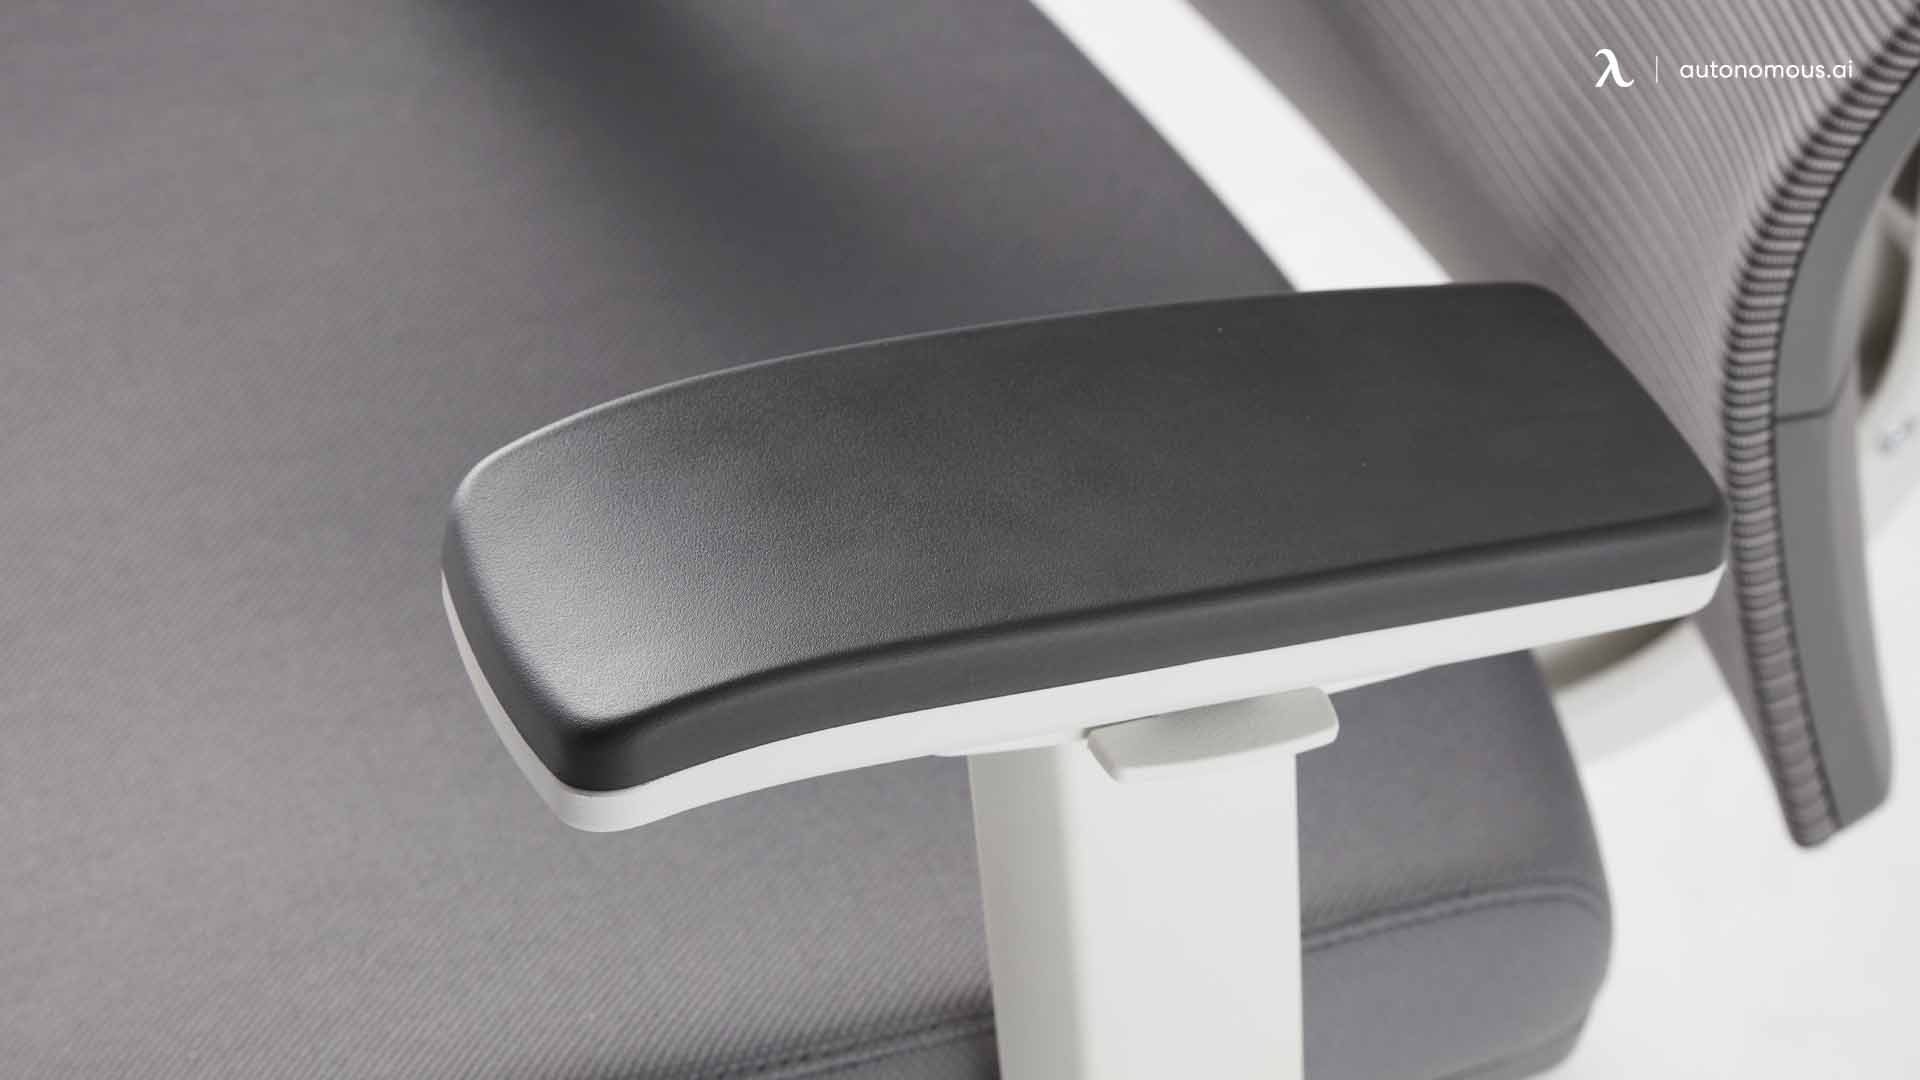 Ergonomic chair with armrests